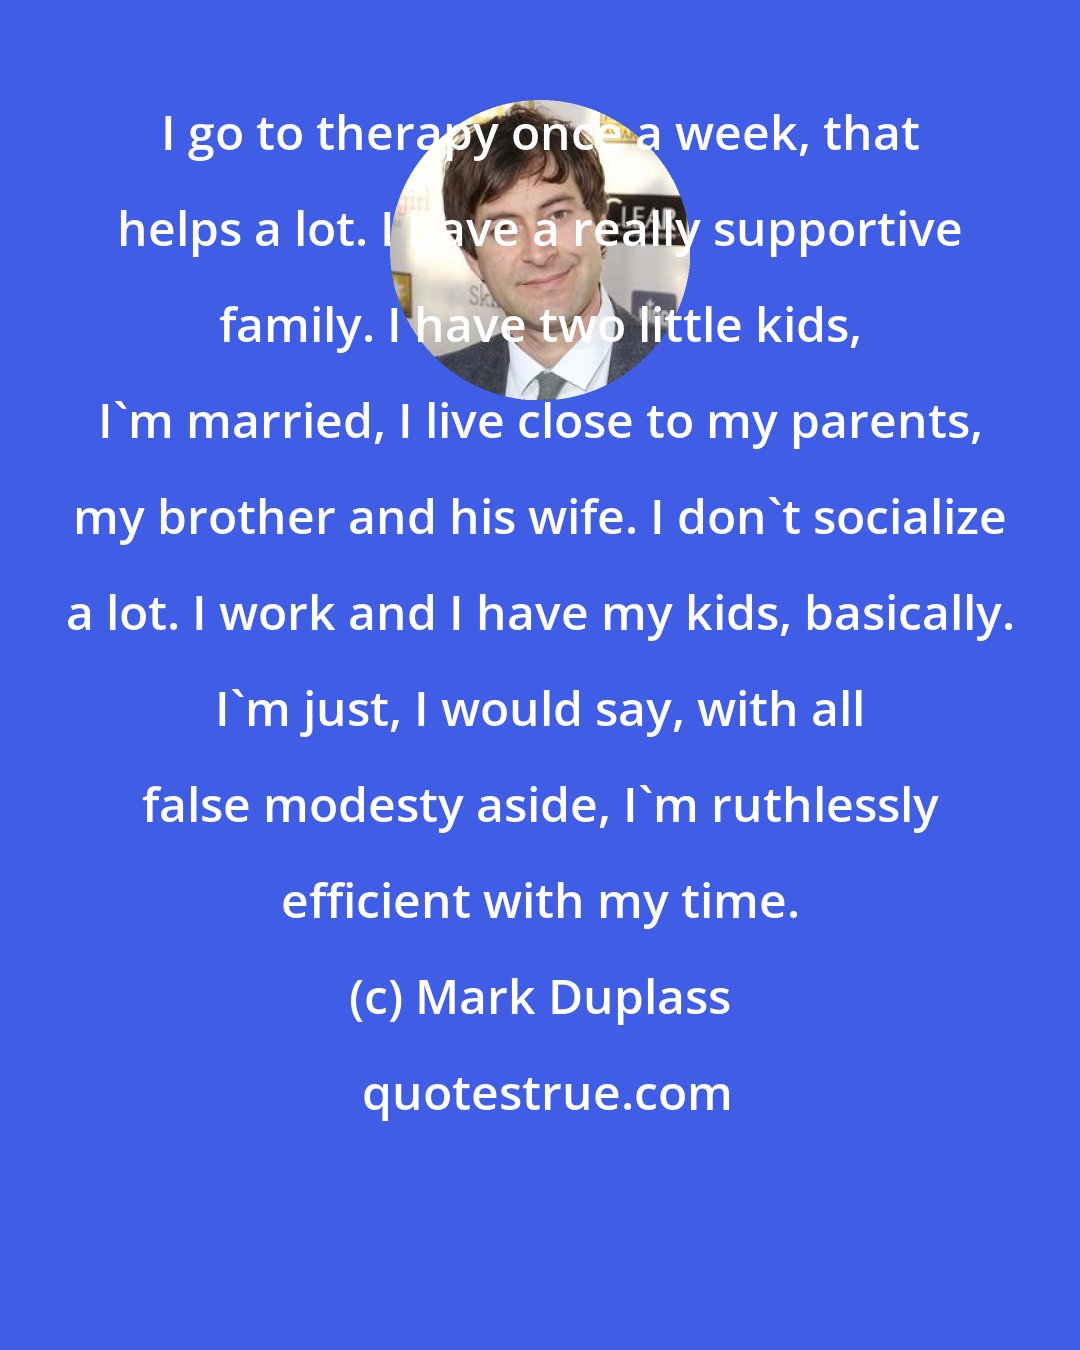 Mark Duplass: I go to therapy once a week, that helps a lot. I have a really supportive family. I have two little kids, I'm married, I live close to my parents, my brother and his wife. I don't socialize a lot. I work and I have my kids, basically. I'm just, I would say, with all false modesty aside, I'm ruthlessly efficient with my time.